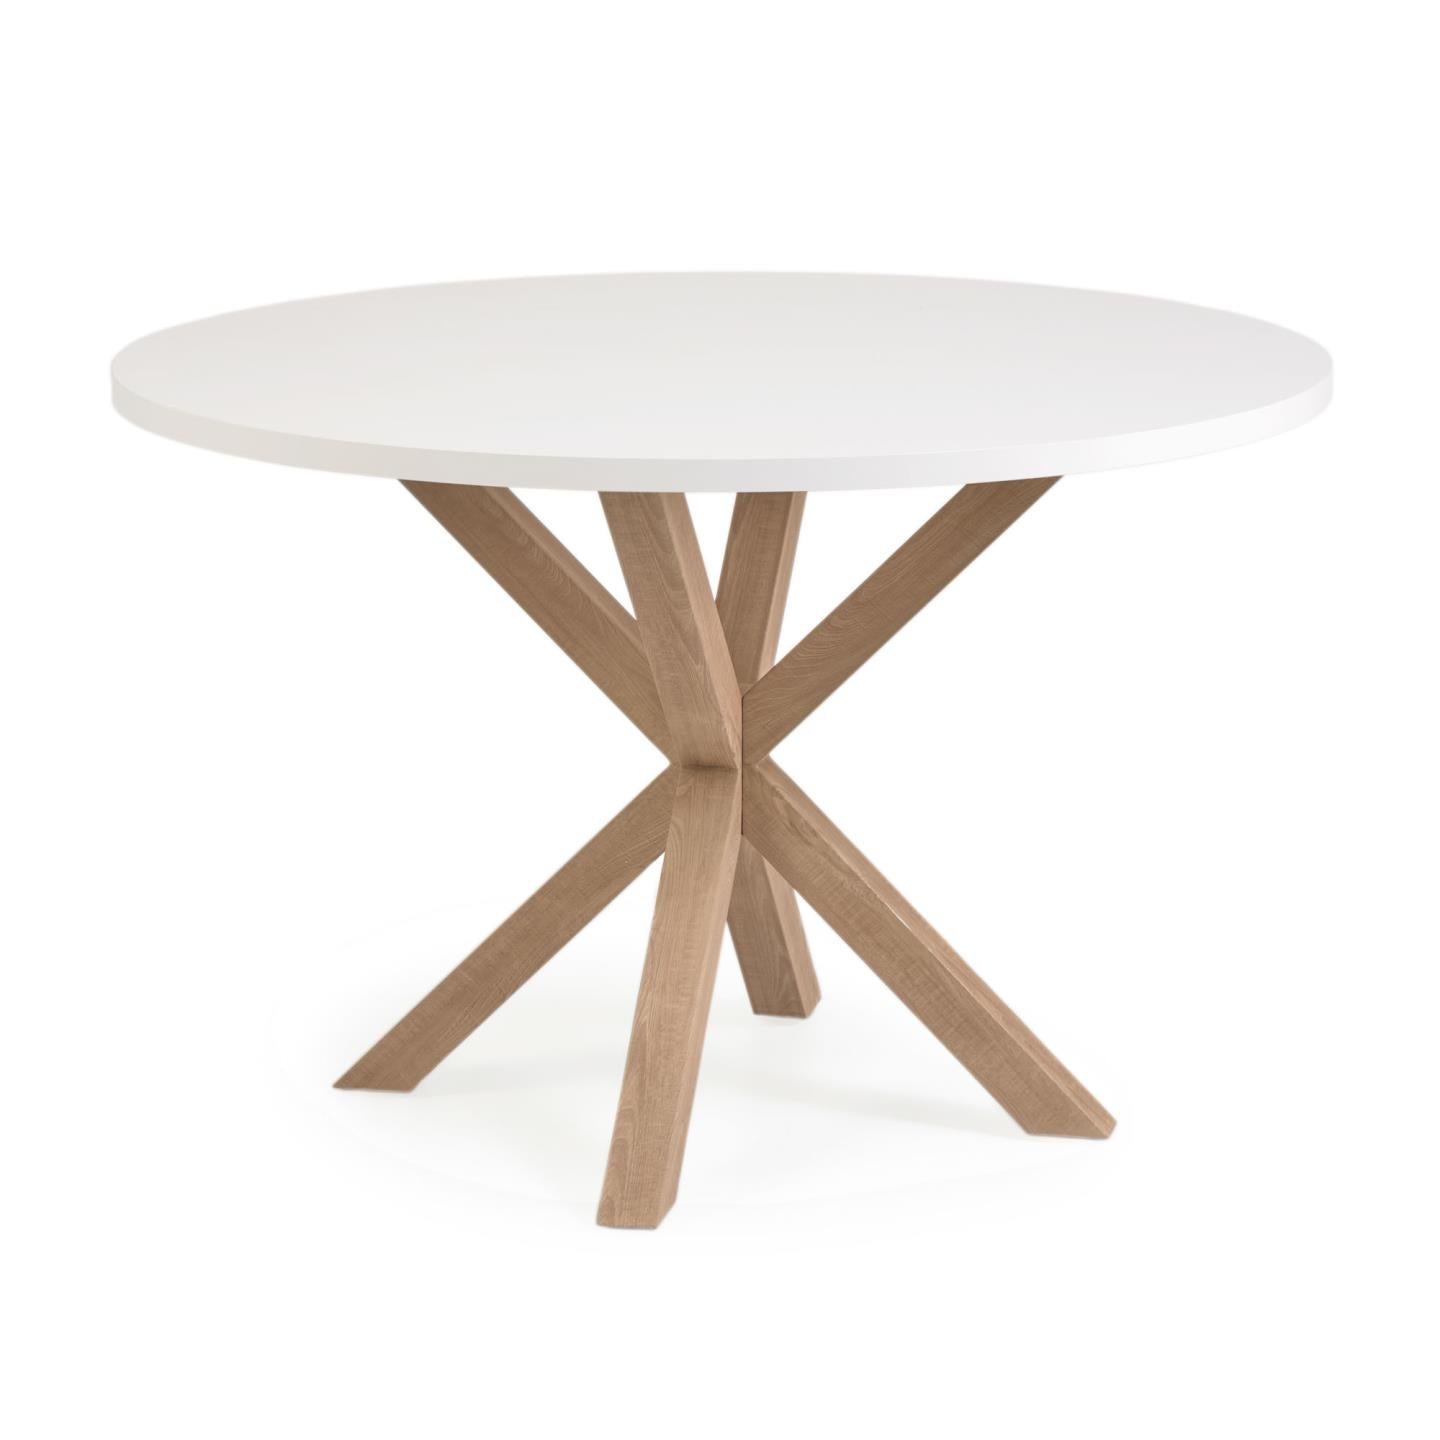 Full Argo round Ø 119 cm white melamine table with steel legs with wood-effect finish